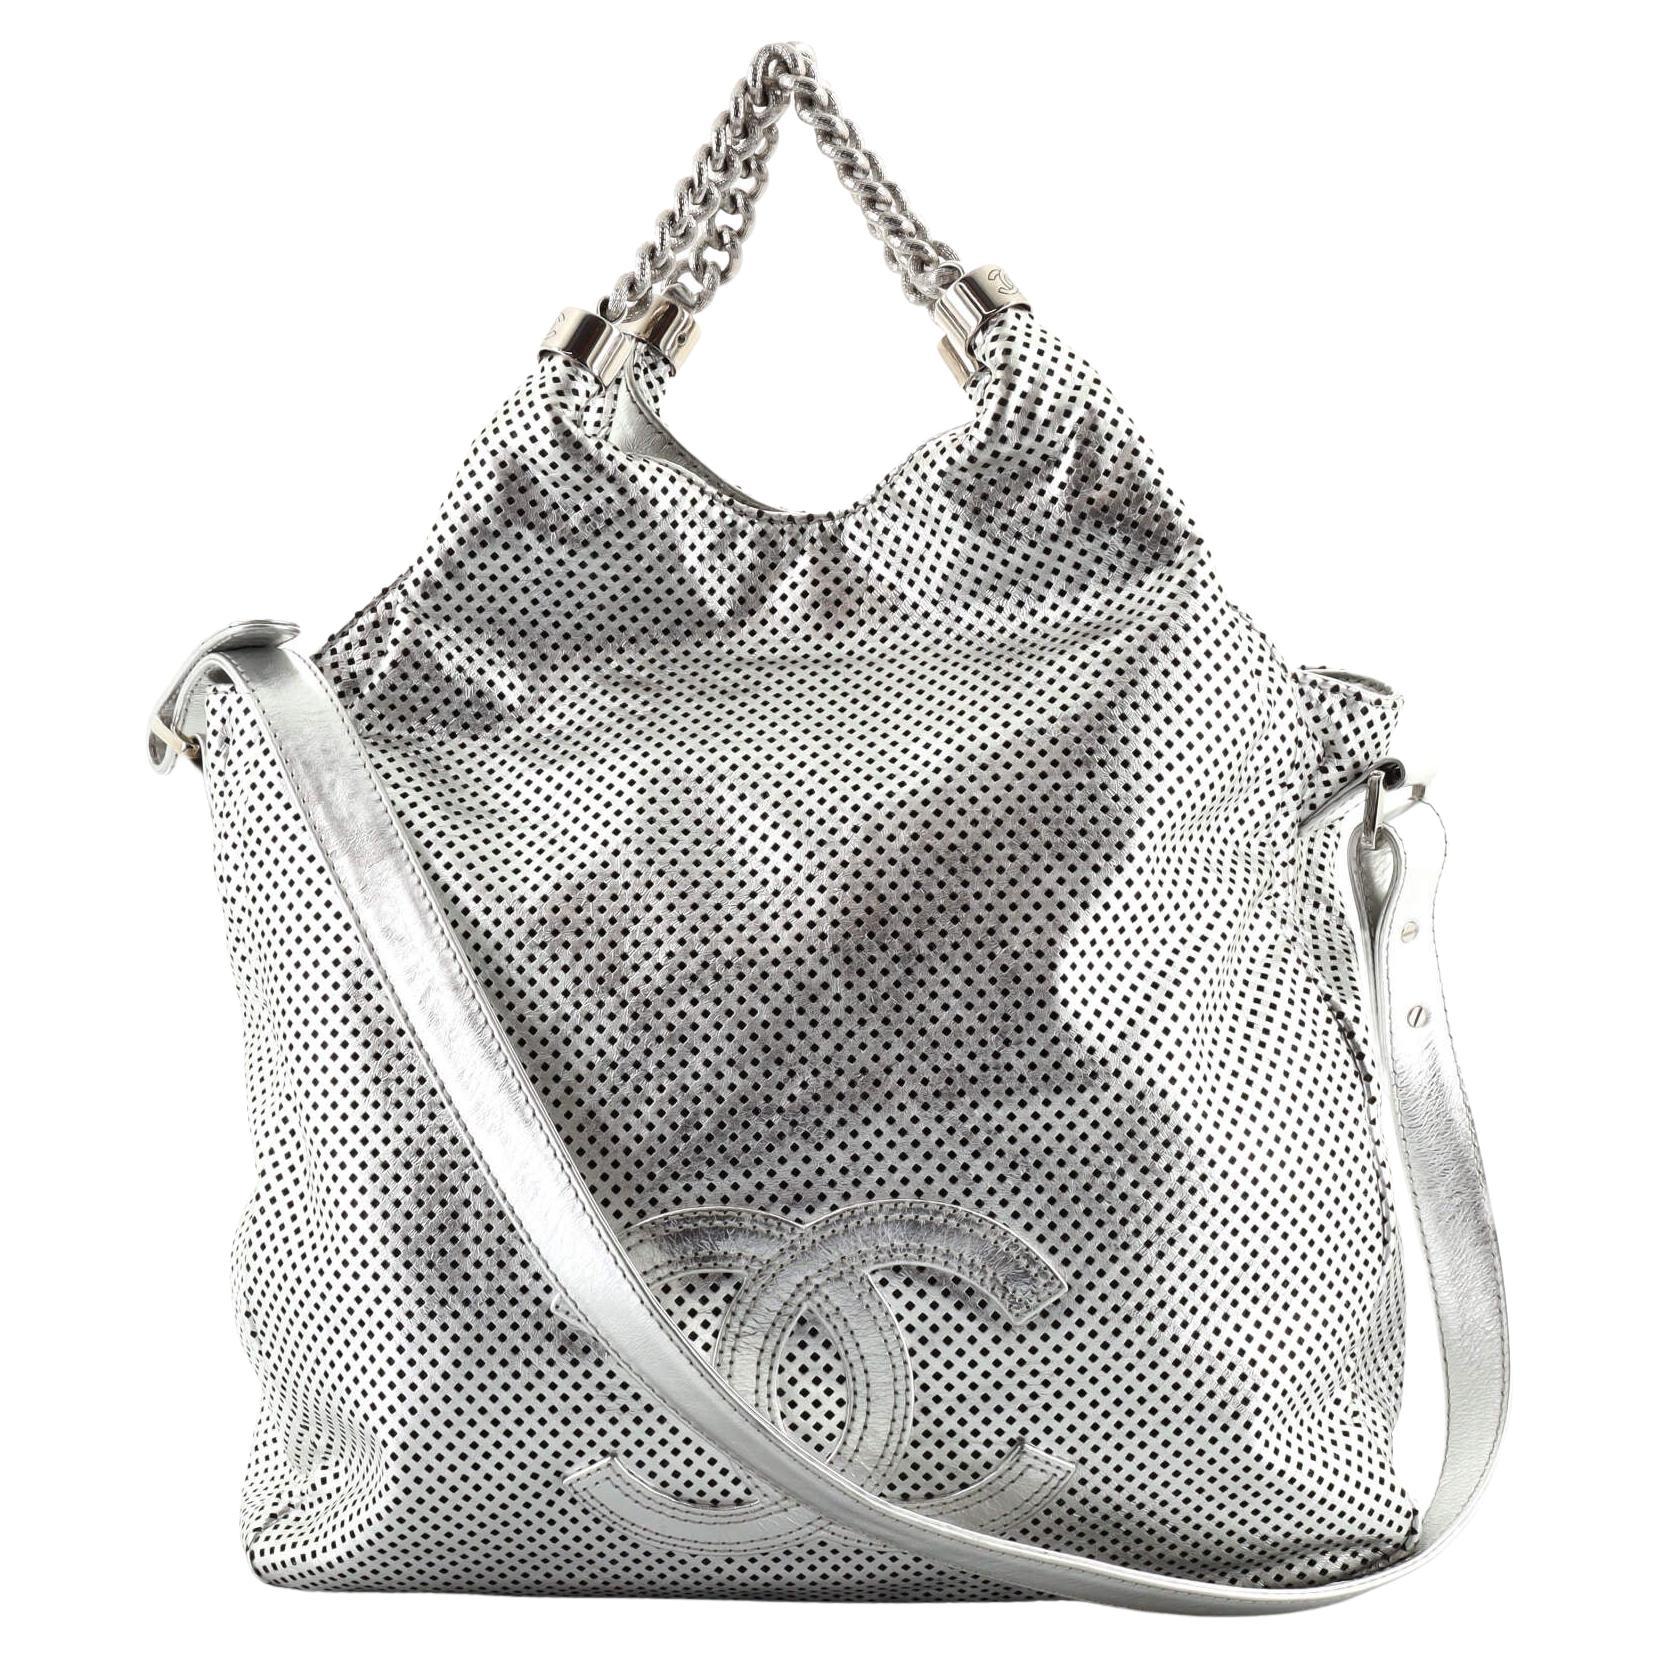 Chanel Rodeo Drive Hobo Perforated Leather Medium